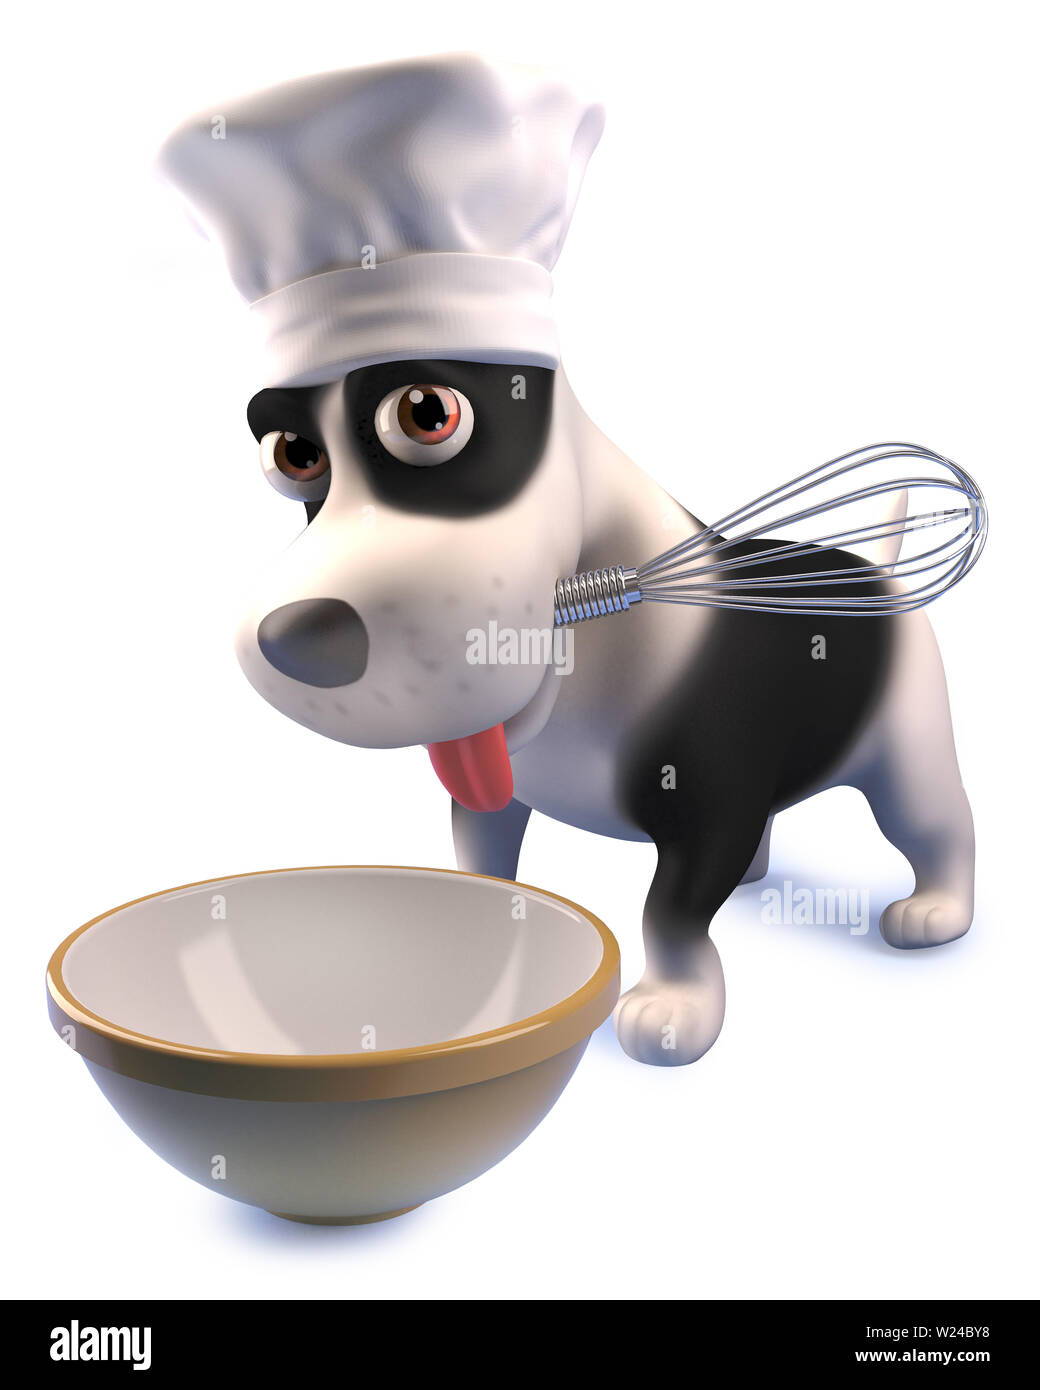 https://c8.alamy.com/comp/W24BY8/rendered-image-of-a-cartoon-puppy-dog-in-chefs-hat-making-a-cake-with-a-whisk-and-mixing-bowl-3d-illustration-W24BY8.jpg